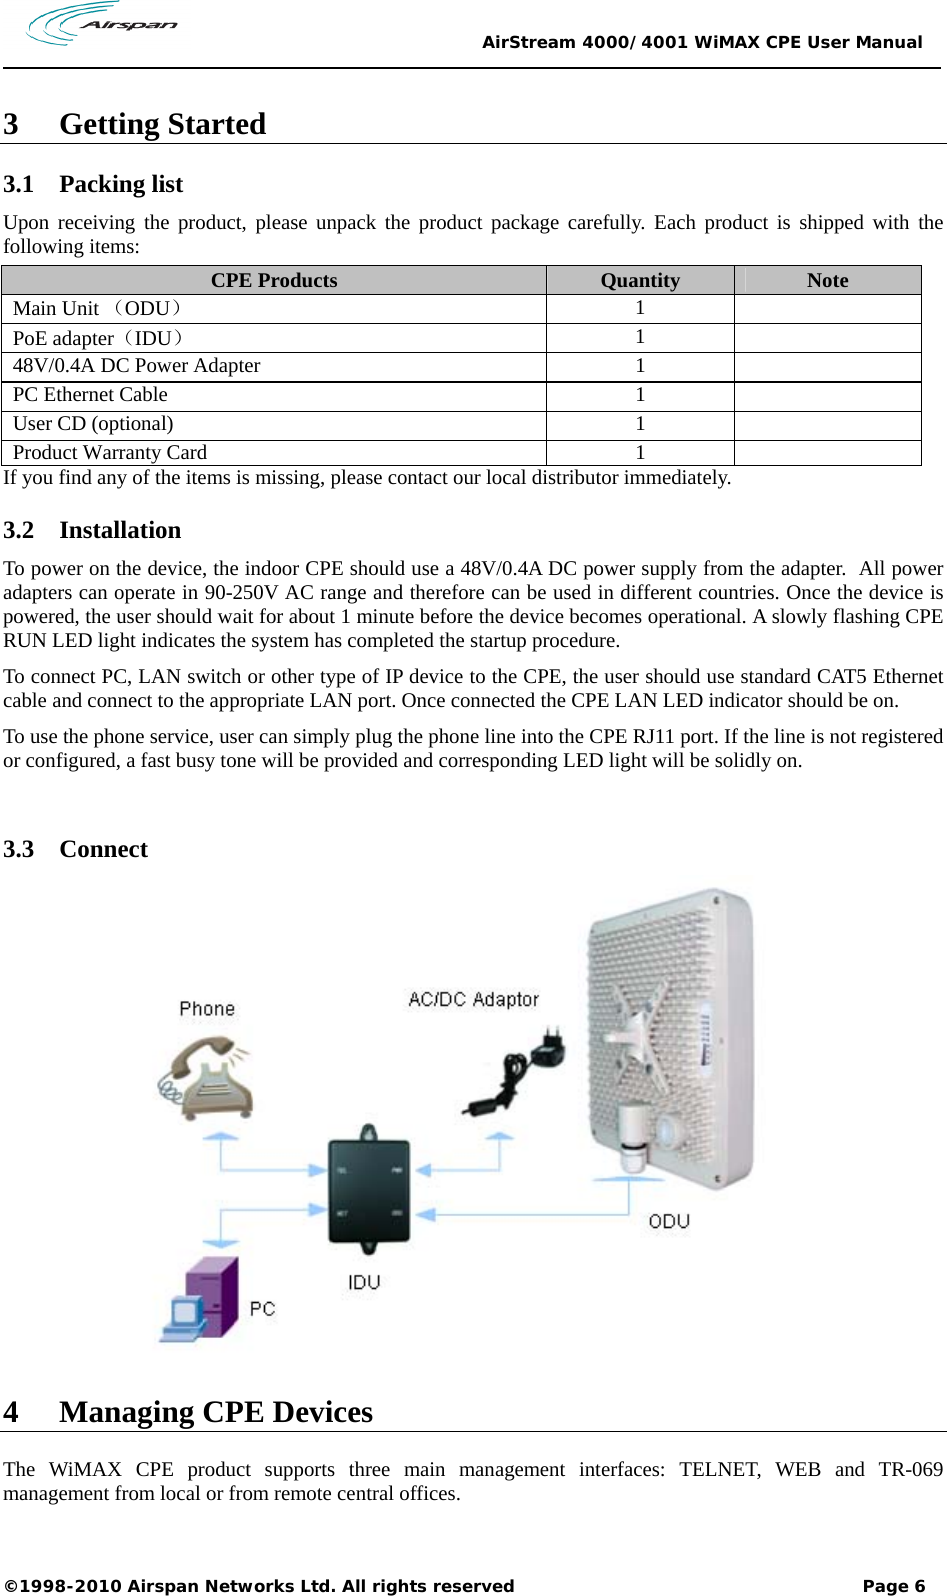                                                 AirStream 4000/4001 WiMAX CPE User Manual ©1998-2010 Airspan Networks Ltd. All rights reserved                                                             Page 6  3 Getting Started 3.1 Packing list Upon receiving the product, please unpack the product package carefully. Each product is shipped with the following items:  CPE Products  Quantity  Note Main Unit （ODU） 1  PoE adapter（IDU） 1  48V/0.4A DC Power Adapter  1   PC Ethernet Cable  1   User CD (optional)   1   Product Warranty Card  1   If you find any of the items is missing, please contact our local distributor immediately. 3.2 Installation  To power on the device, the indoor CPE should use a 48V/0.4A DC power supply from the adapter.  All power adapters can operate in 90-250V AC range and therefore can be used in different countries. Once the device is powered, the user should wait for about 1 minute before the device becomes operational. A slowly flashing CPE RUN LED light indicates the system has completed the startup procedure.   To connect PC, LAN switch or other type of IP device to the CPE, the user should use standard CAT5 Ethernet cable and connect to the appropriate LAN port. Once connected the CPE LAN LED indicator should be on.  To use the phone service, user can simply plug the phone line into the CPE RJ11 port. If the line is not registered or configured, a fast busy tone will be provided and corresponding LED light will be solidly on.   3.3 Connect   4 Managing CPE Devices The WiMAX CPE product supports three main management interfaces: TELNET, WEB and TR-069 management from local or from remote central offices.  